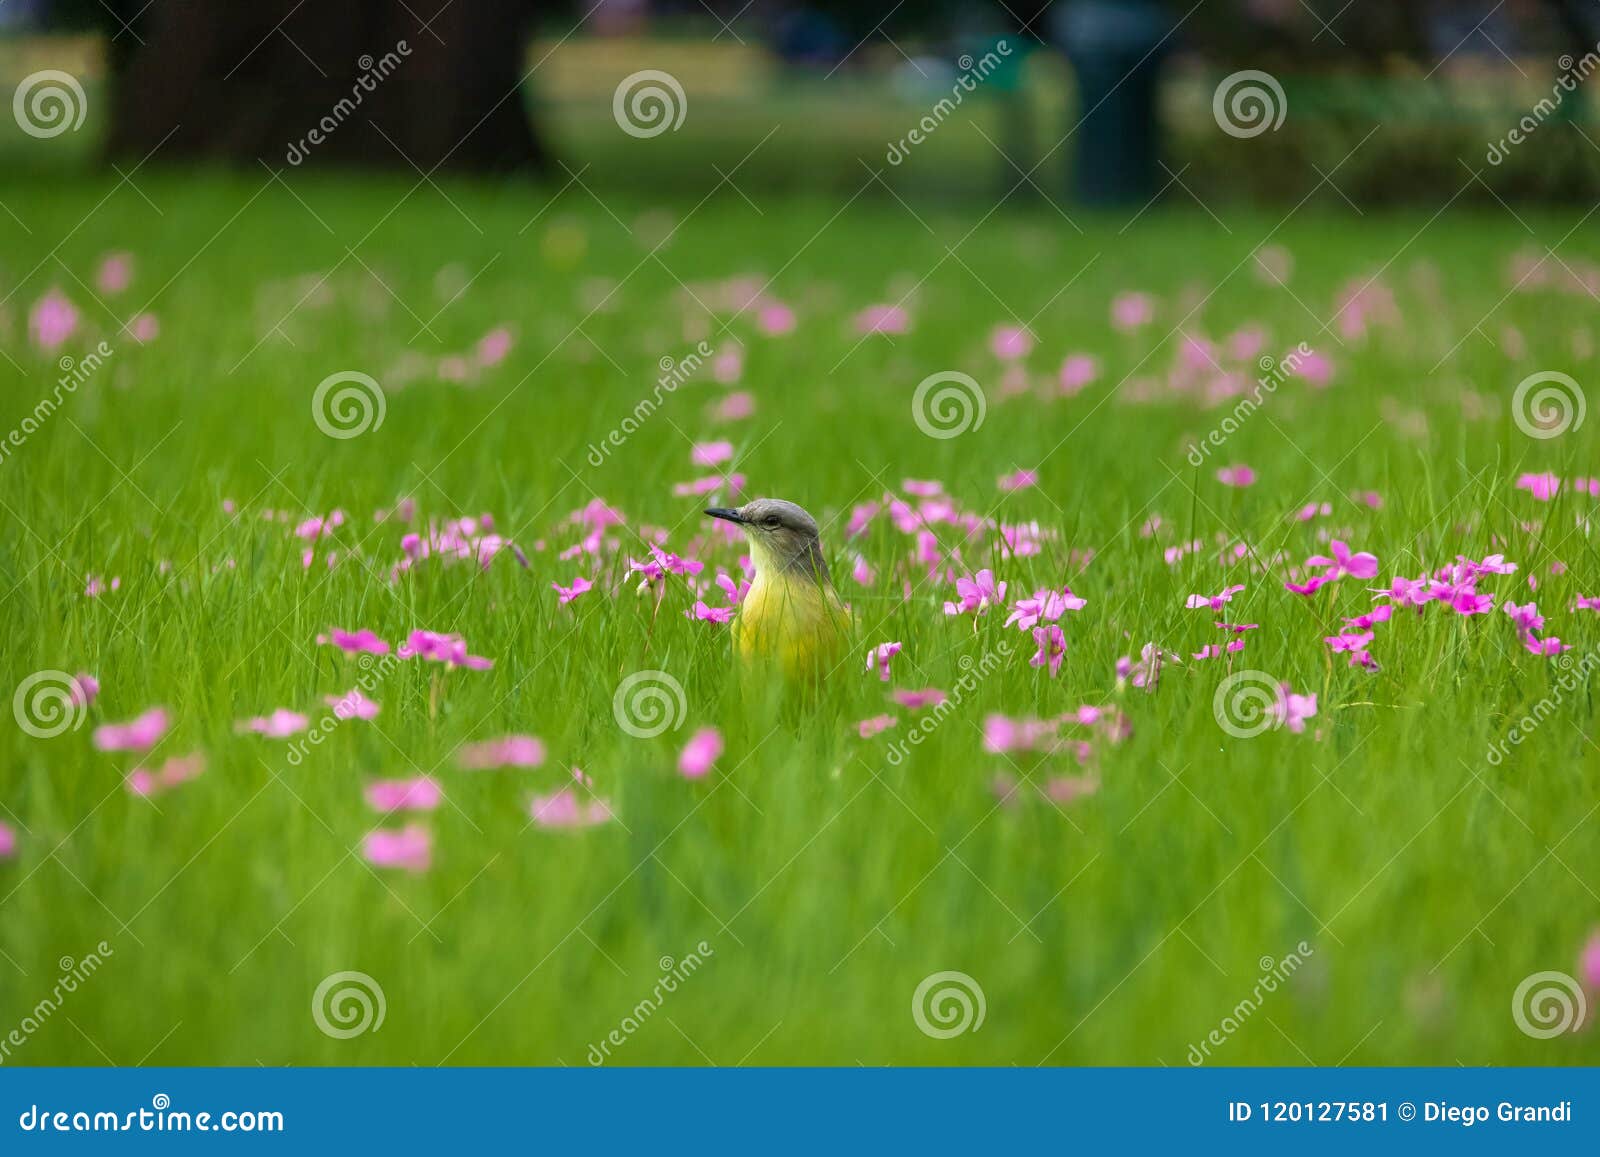 cattle tyrant bird on a high grass green field with pink flowers at bosques de palermo - buenos aires, argentina